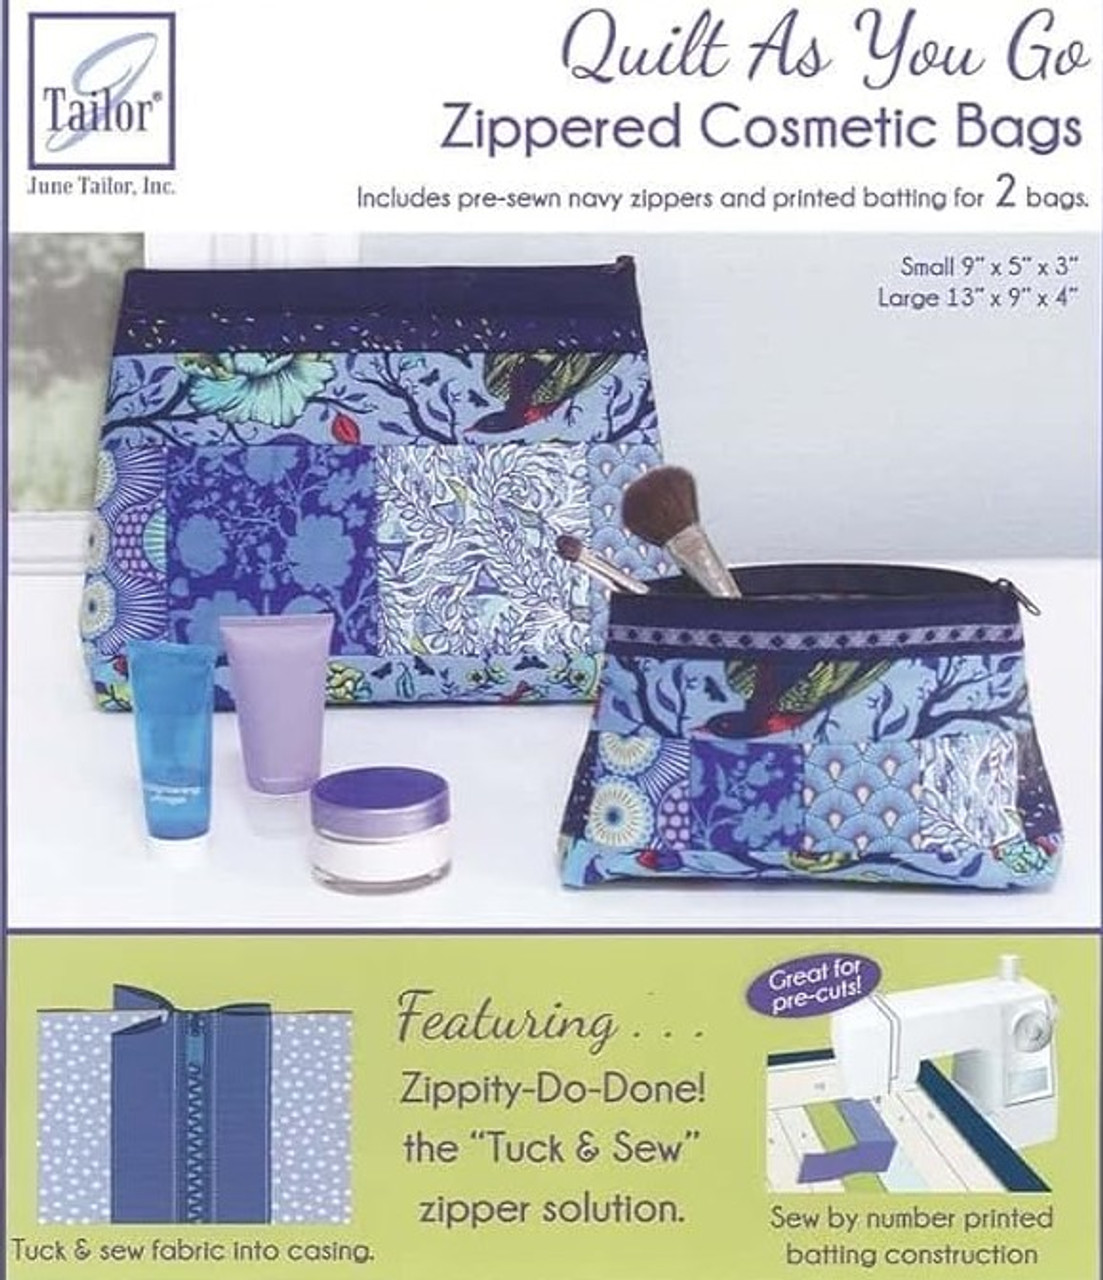 Class: Quilt As You Go Zippered Bag, Saturday January 27